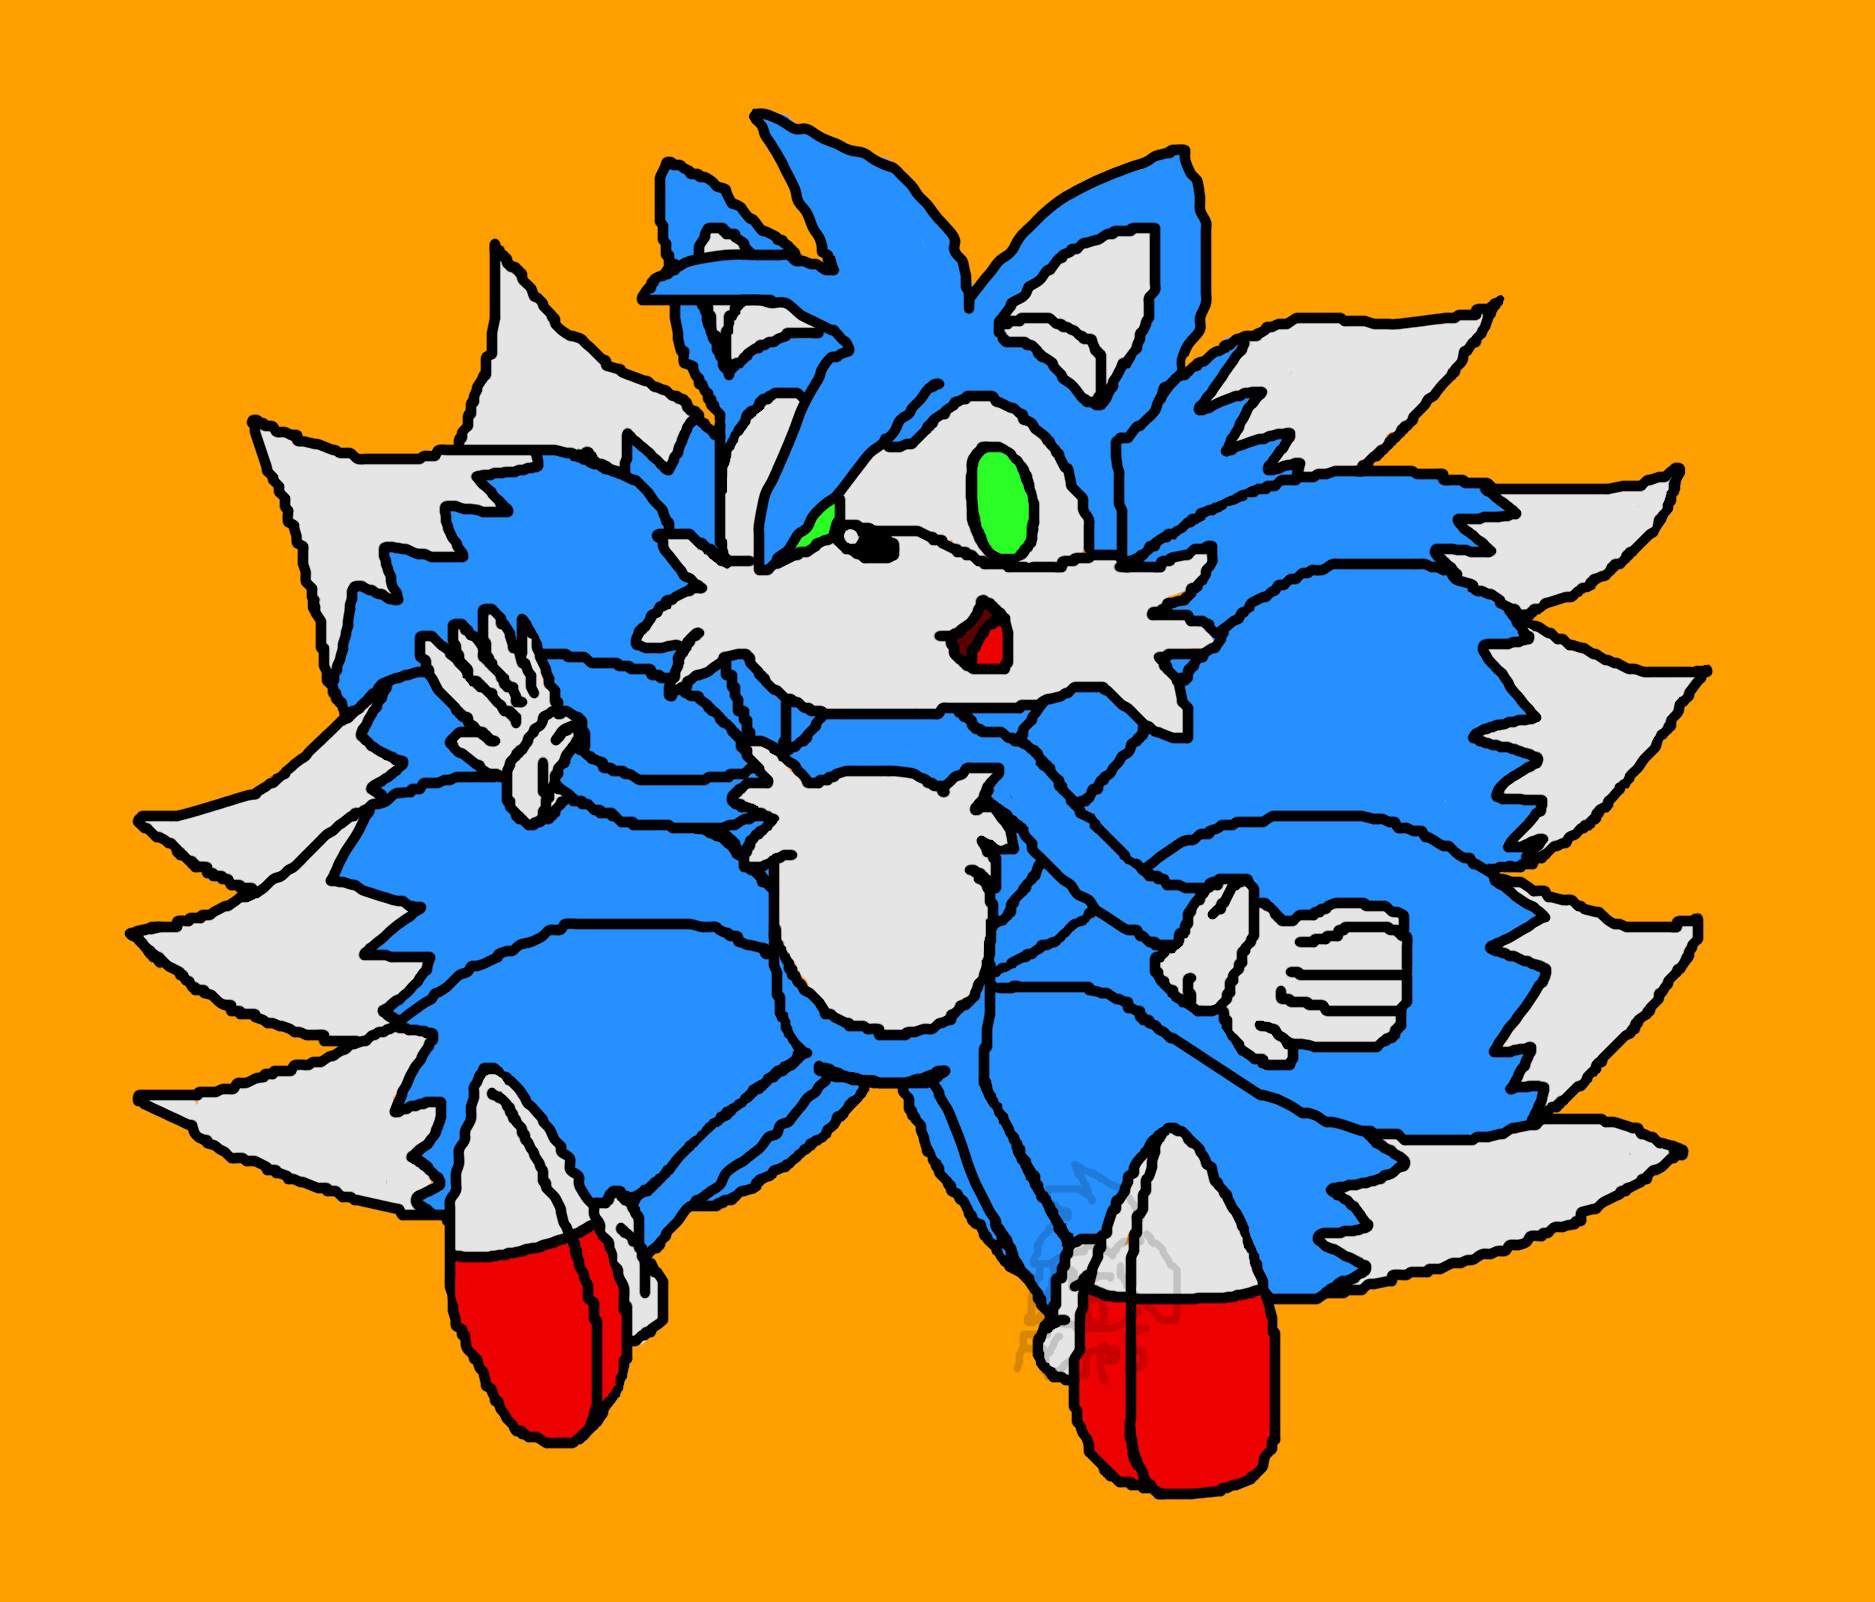 My art - misc request art (chubby sonic, blue tails and logo geodude) Furry...